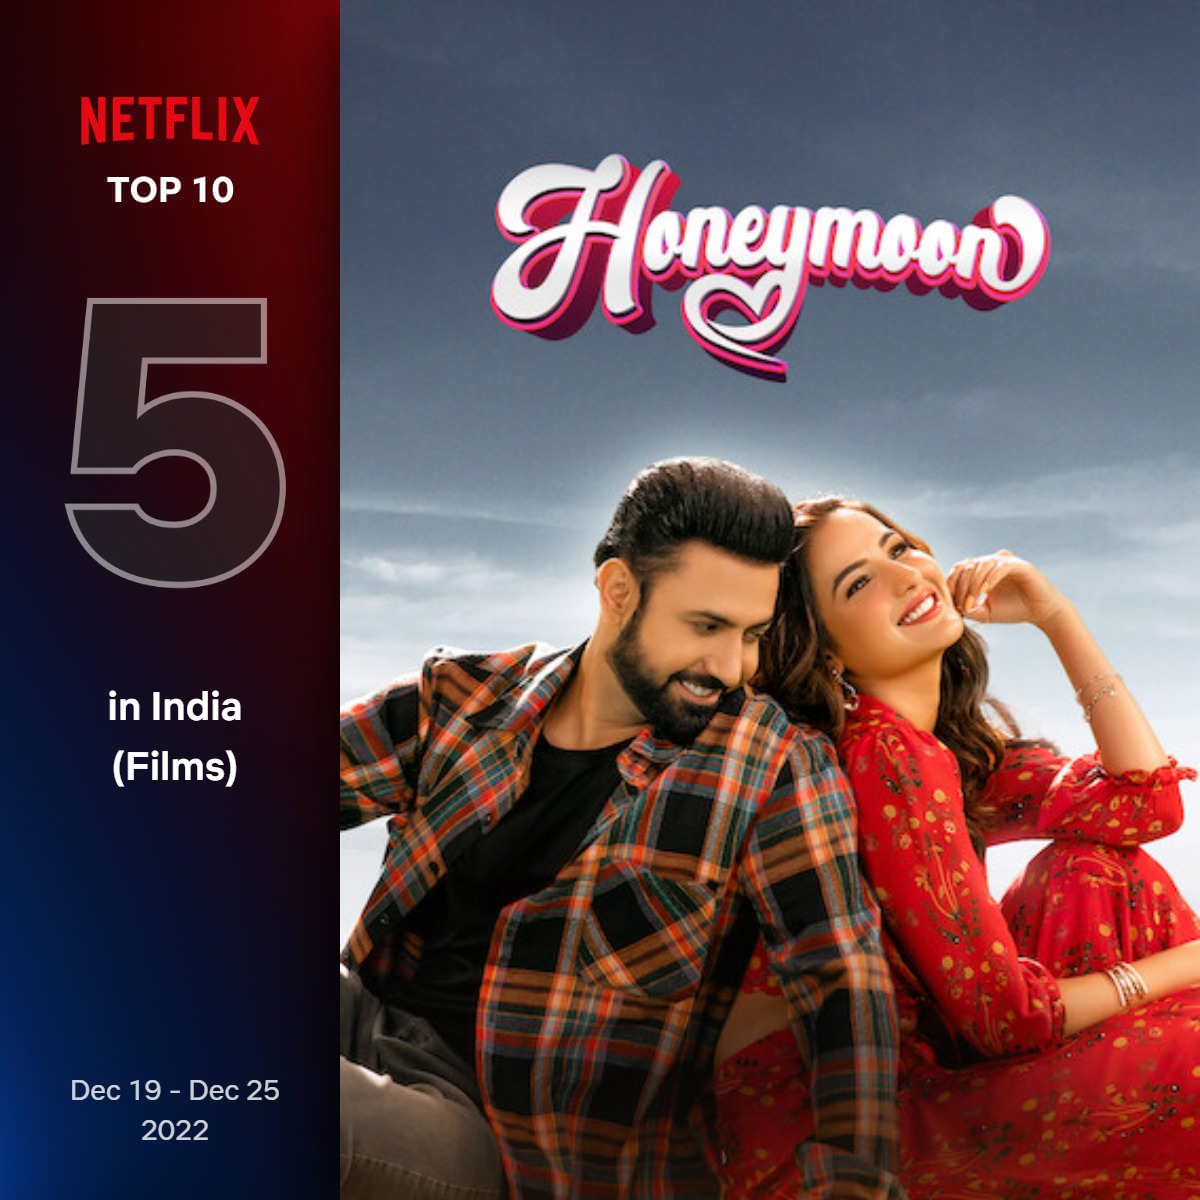 Punjabi film #Honeymoon is among the Top 10 Films on Netflix in India, Pakistan (No. 1) and the UAE in the past week. Directed by Amar Preet Chhabra and starring #GippyGrewal and #JasminBhasin.
#HoneymoonOnNetflix @GippyGrewal @JasminBhasinxSN